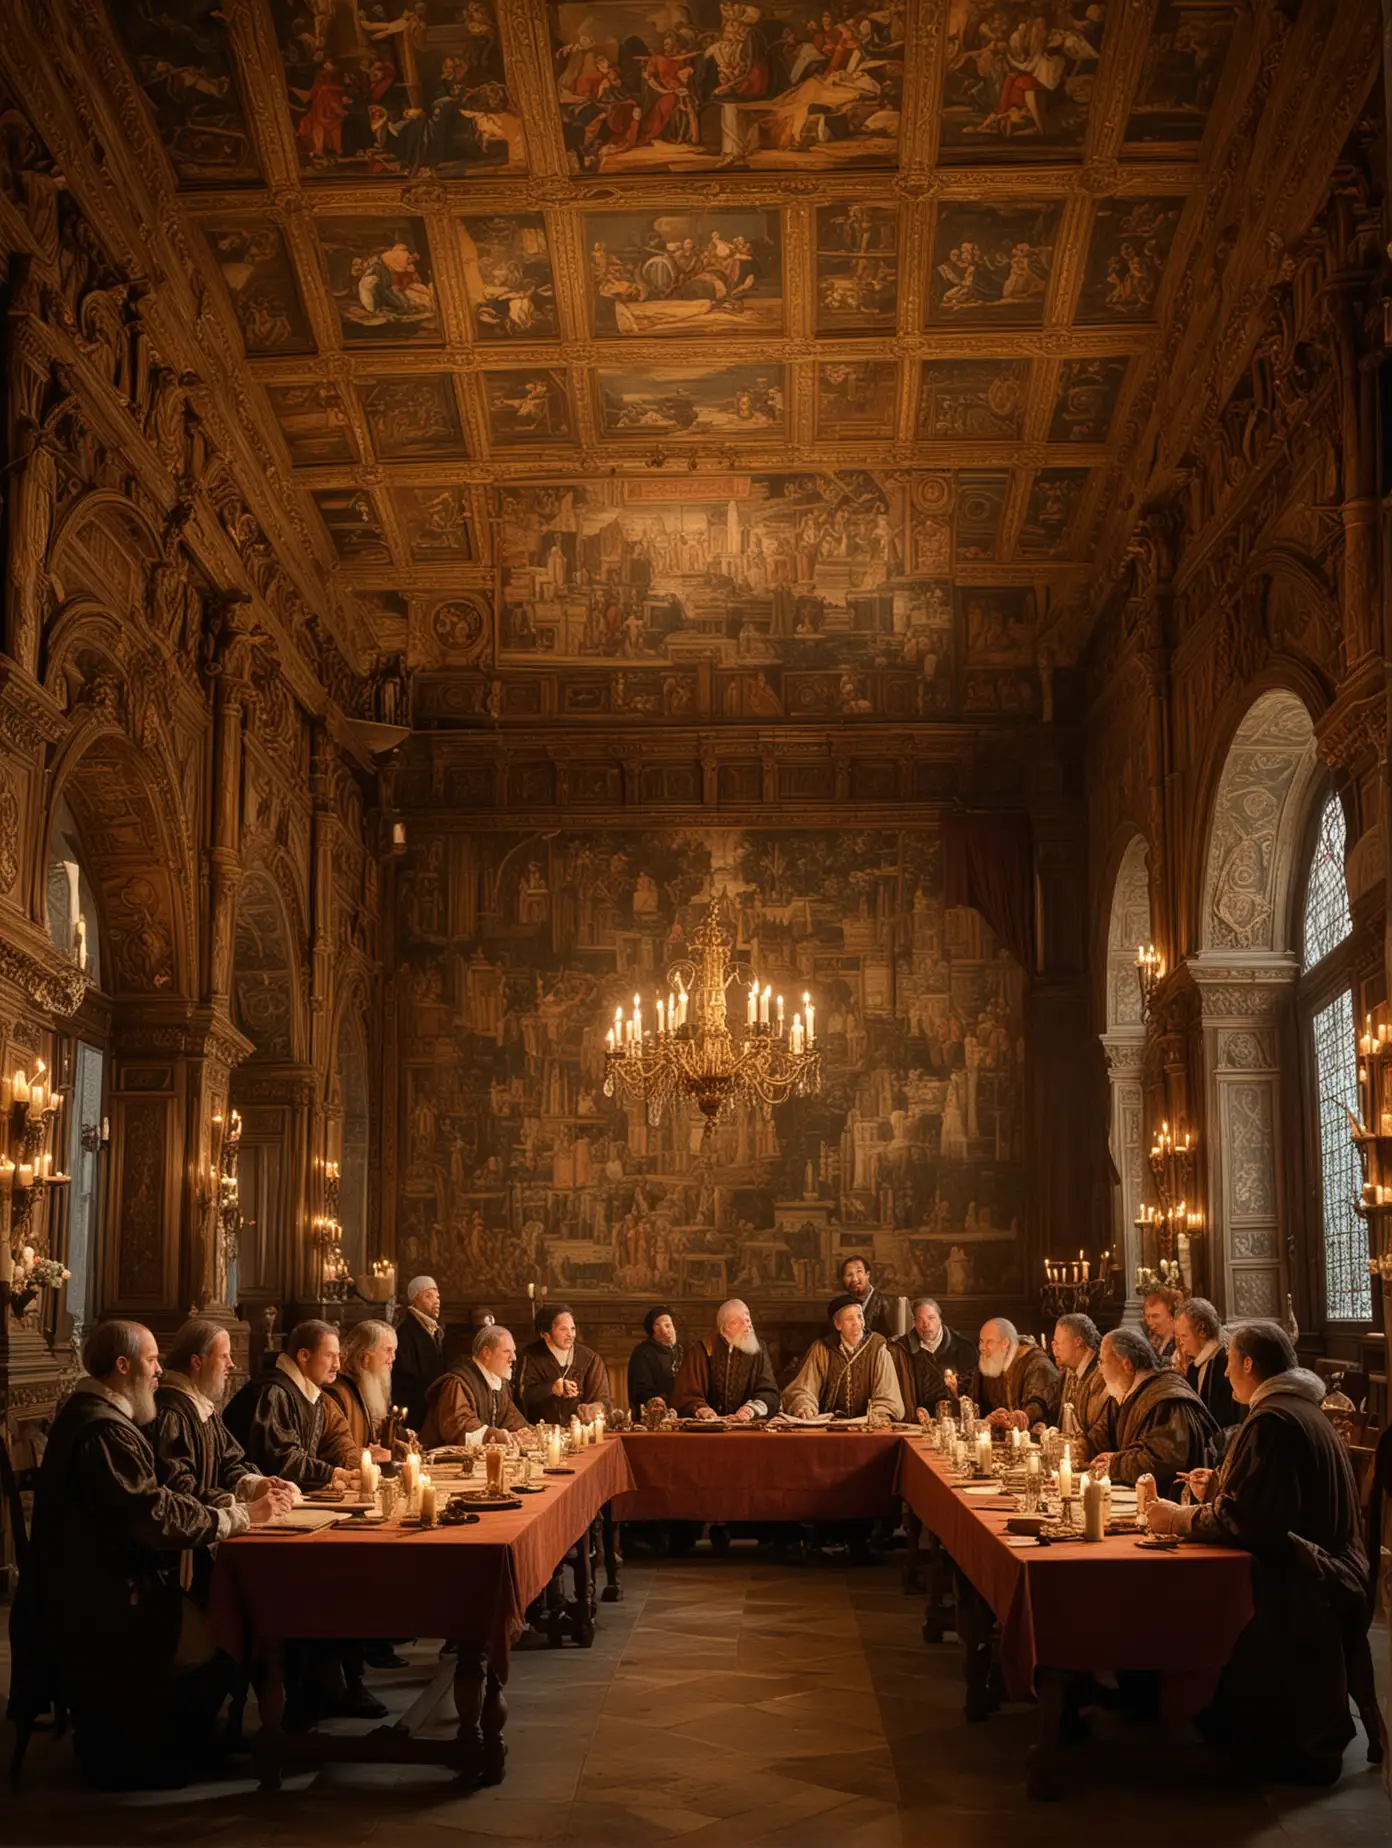 A dramatic scene depicting a group of historical figures from the Renaissance period, gathered in a grand hall. They are engaged in a lively discussion around a large, ornate table covered with maps and scrolls. The room is lit by candlelight, with detailed tapestries and rich wooden paneling. The overall mood is intellectual and intense.